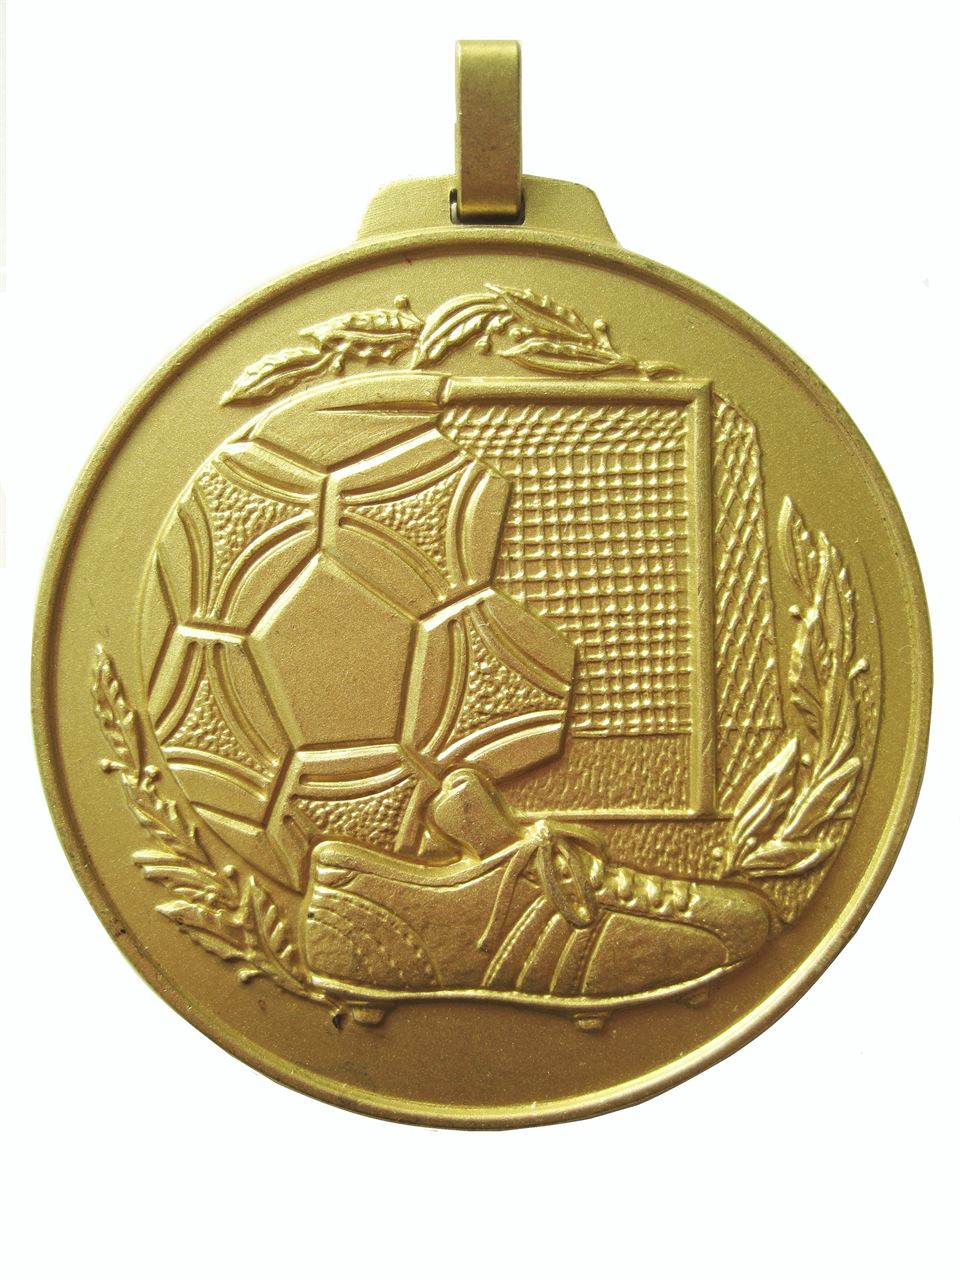 Gold Economy Football Boot Medal (size: 70mm) - 174E